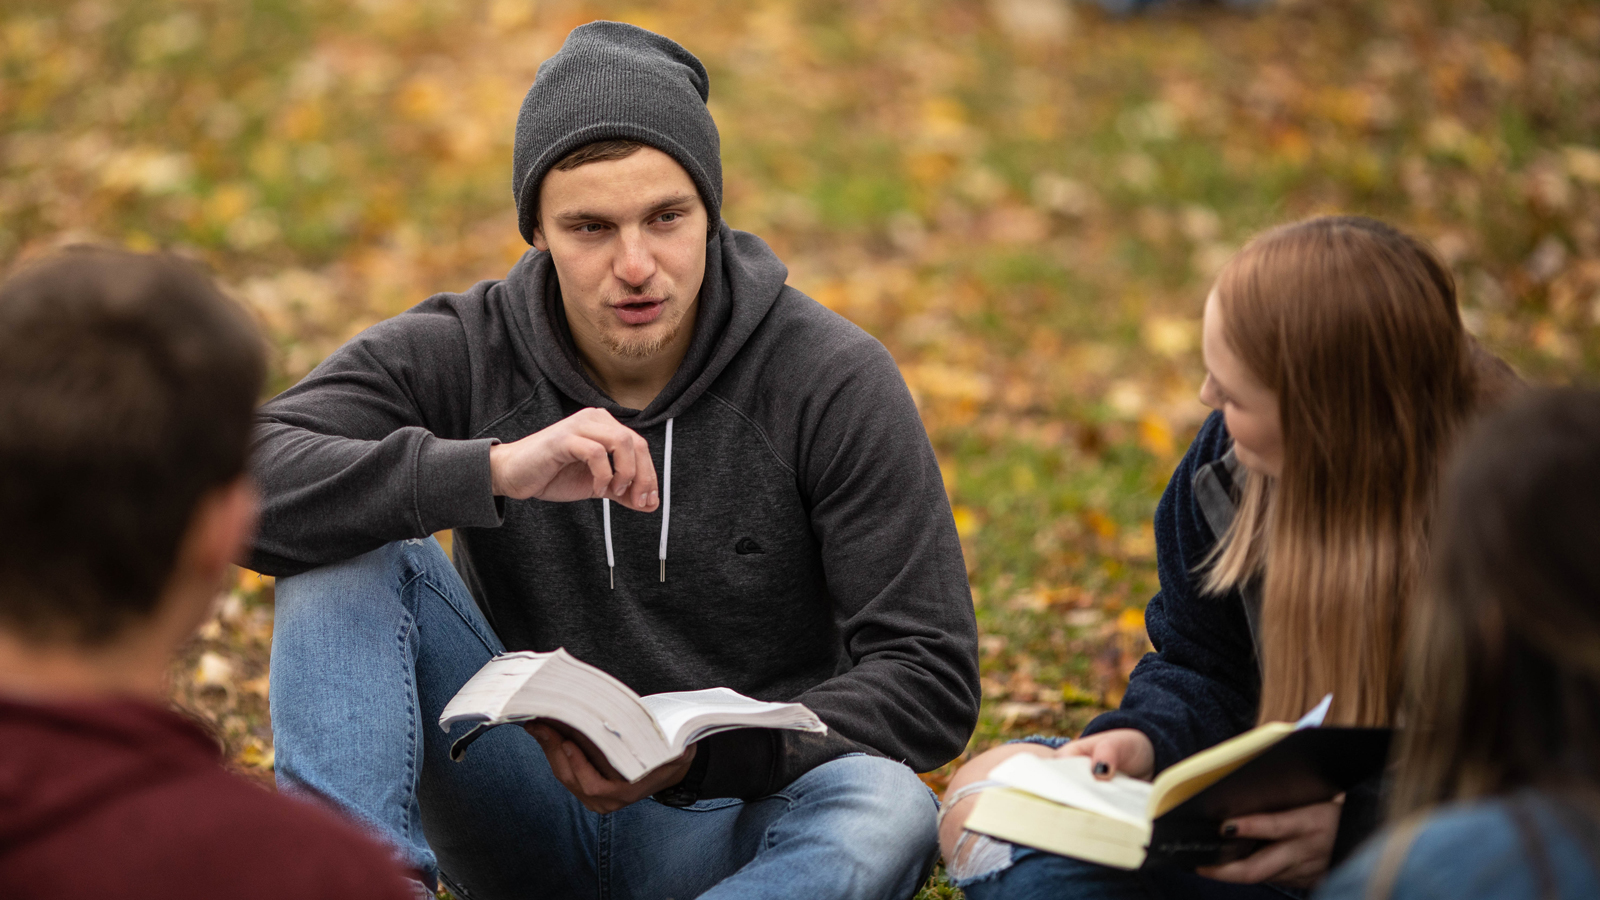 A group of students reading and discussing the Bible